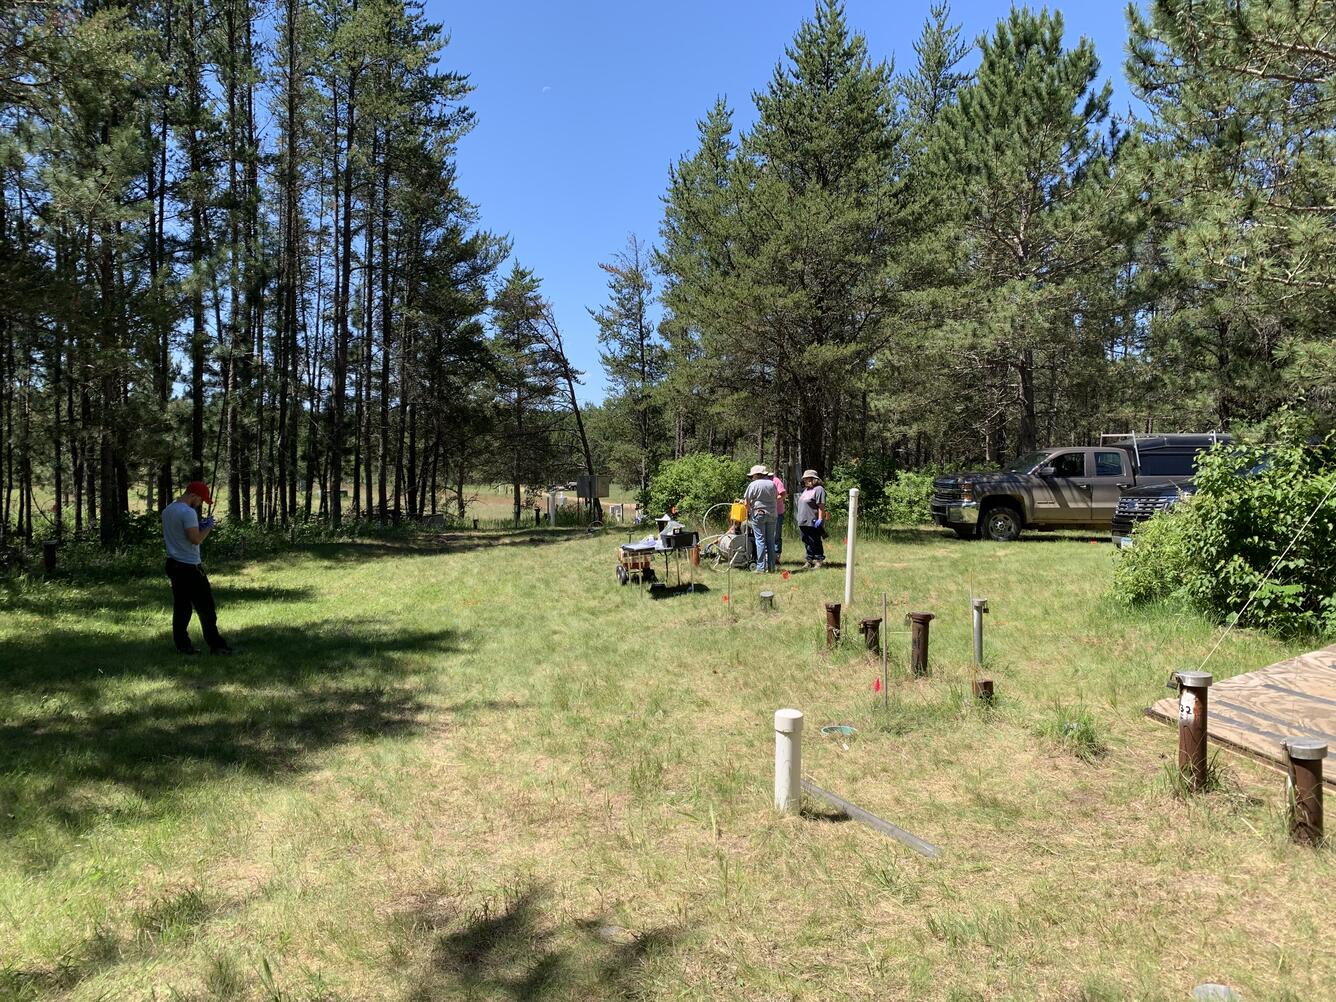 Groundwater sampling along the north well transect at the Bemidji site